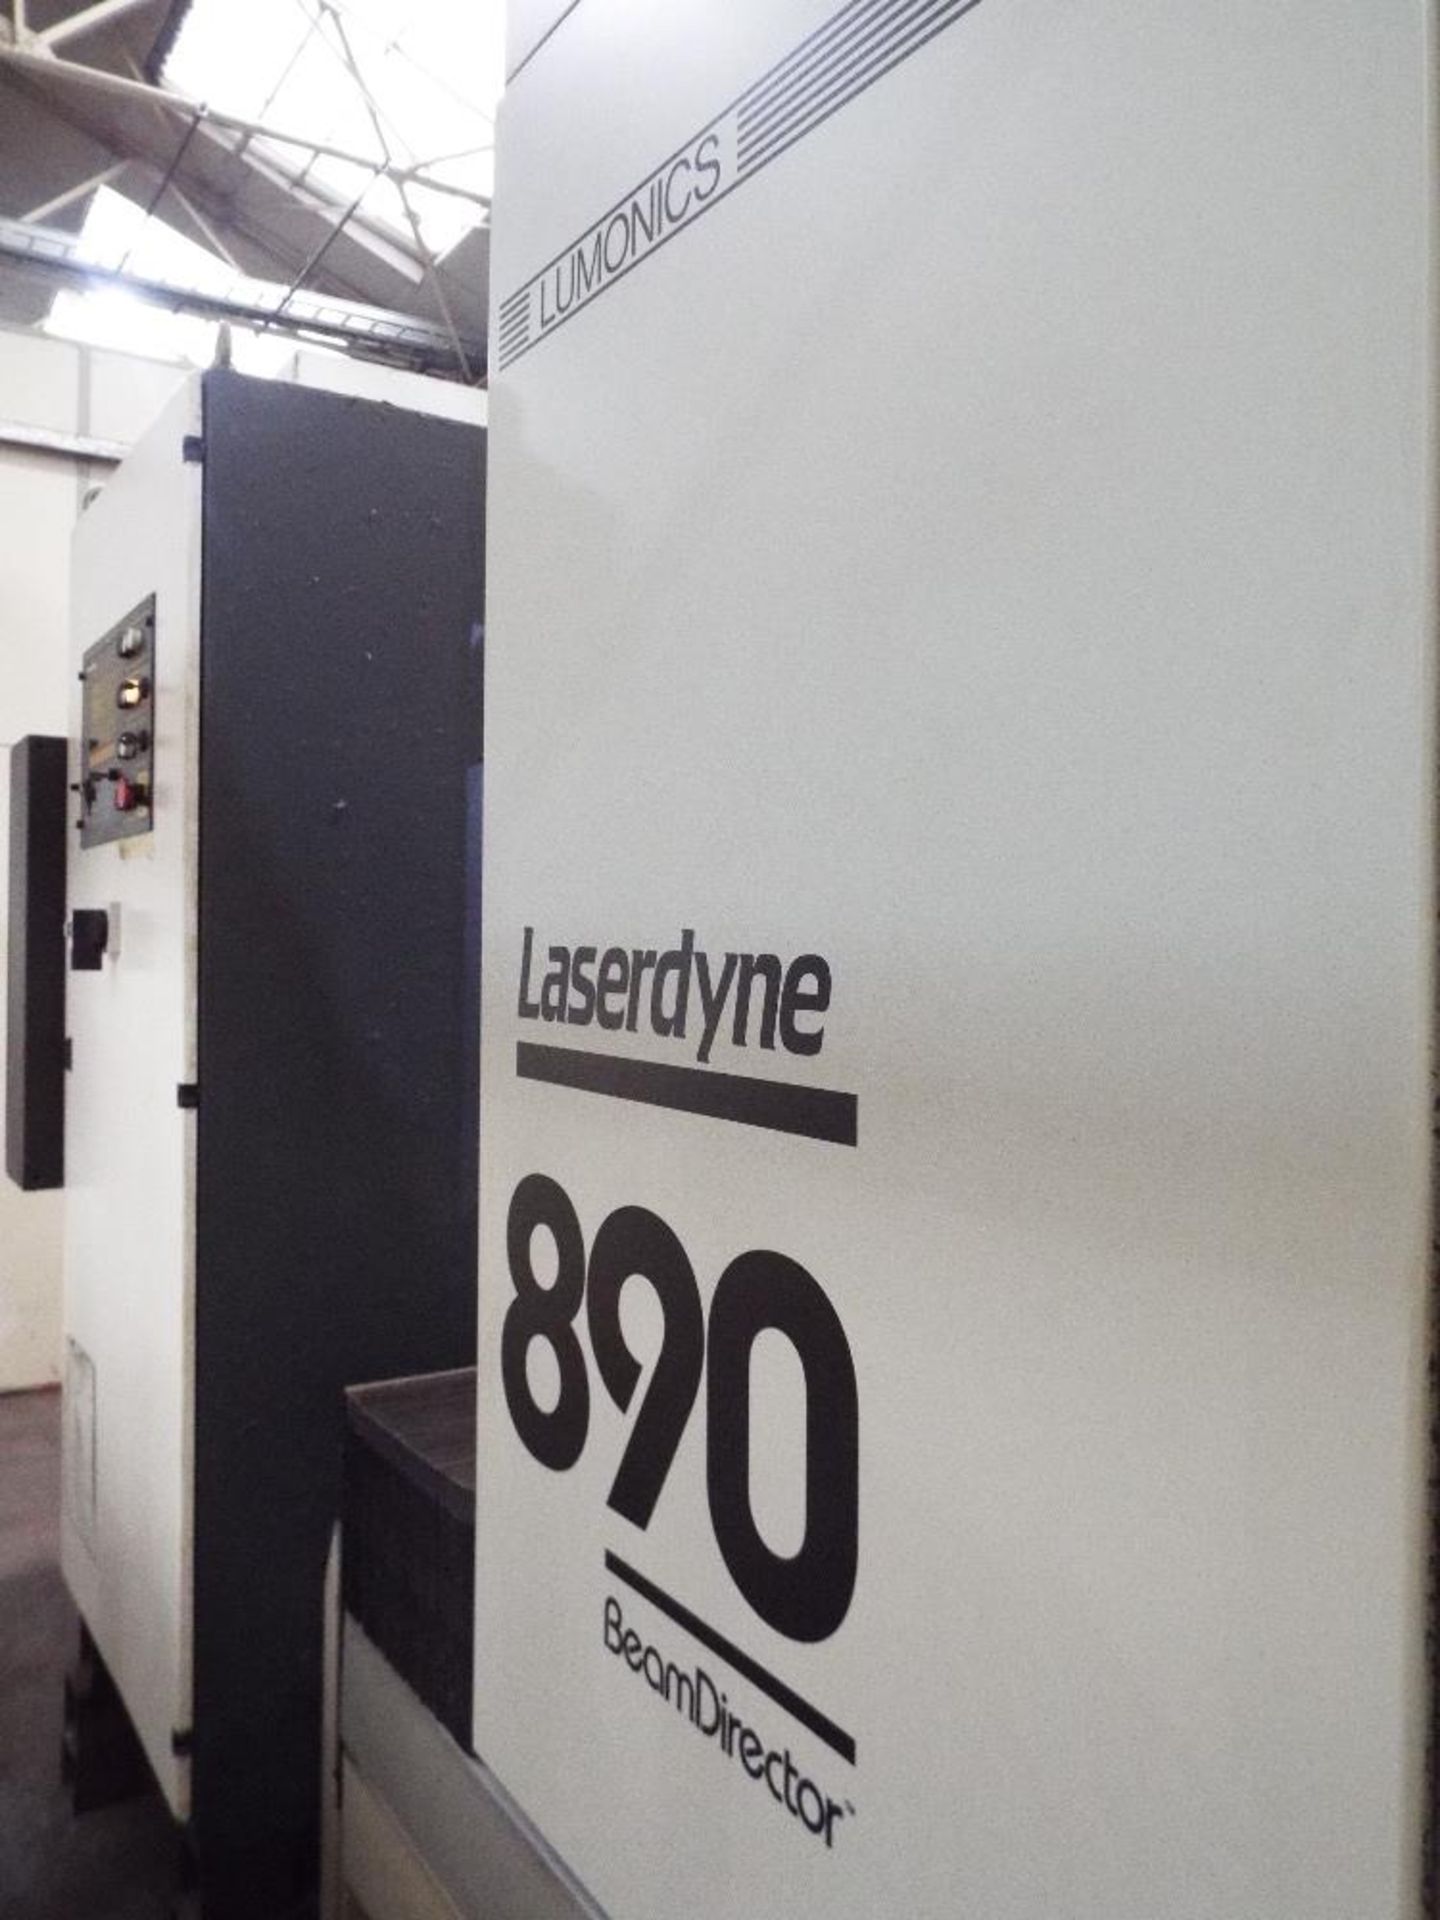 Lumonics Laserdyne 890 Beam Director Multiaxis Laser System cw Dust Extractor and Chilling Unit. - Image 5 of 36